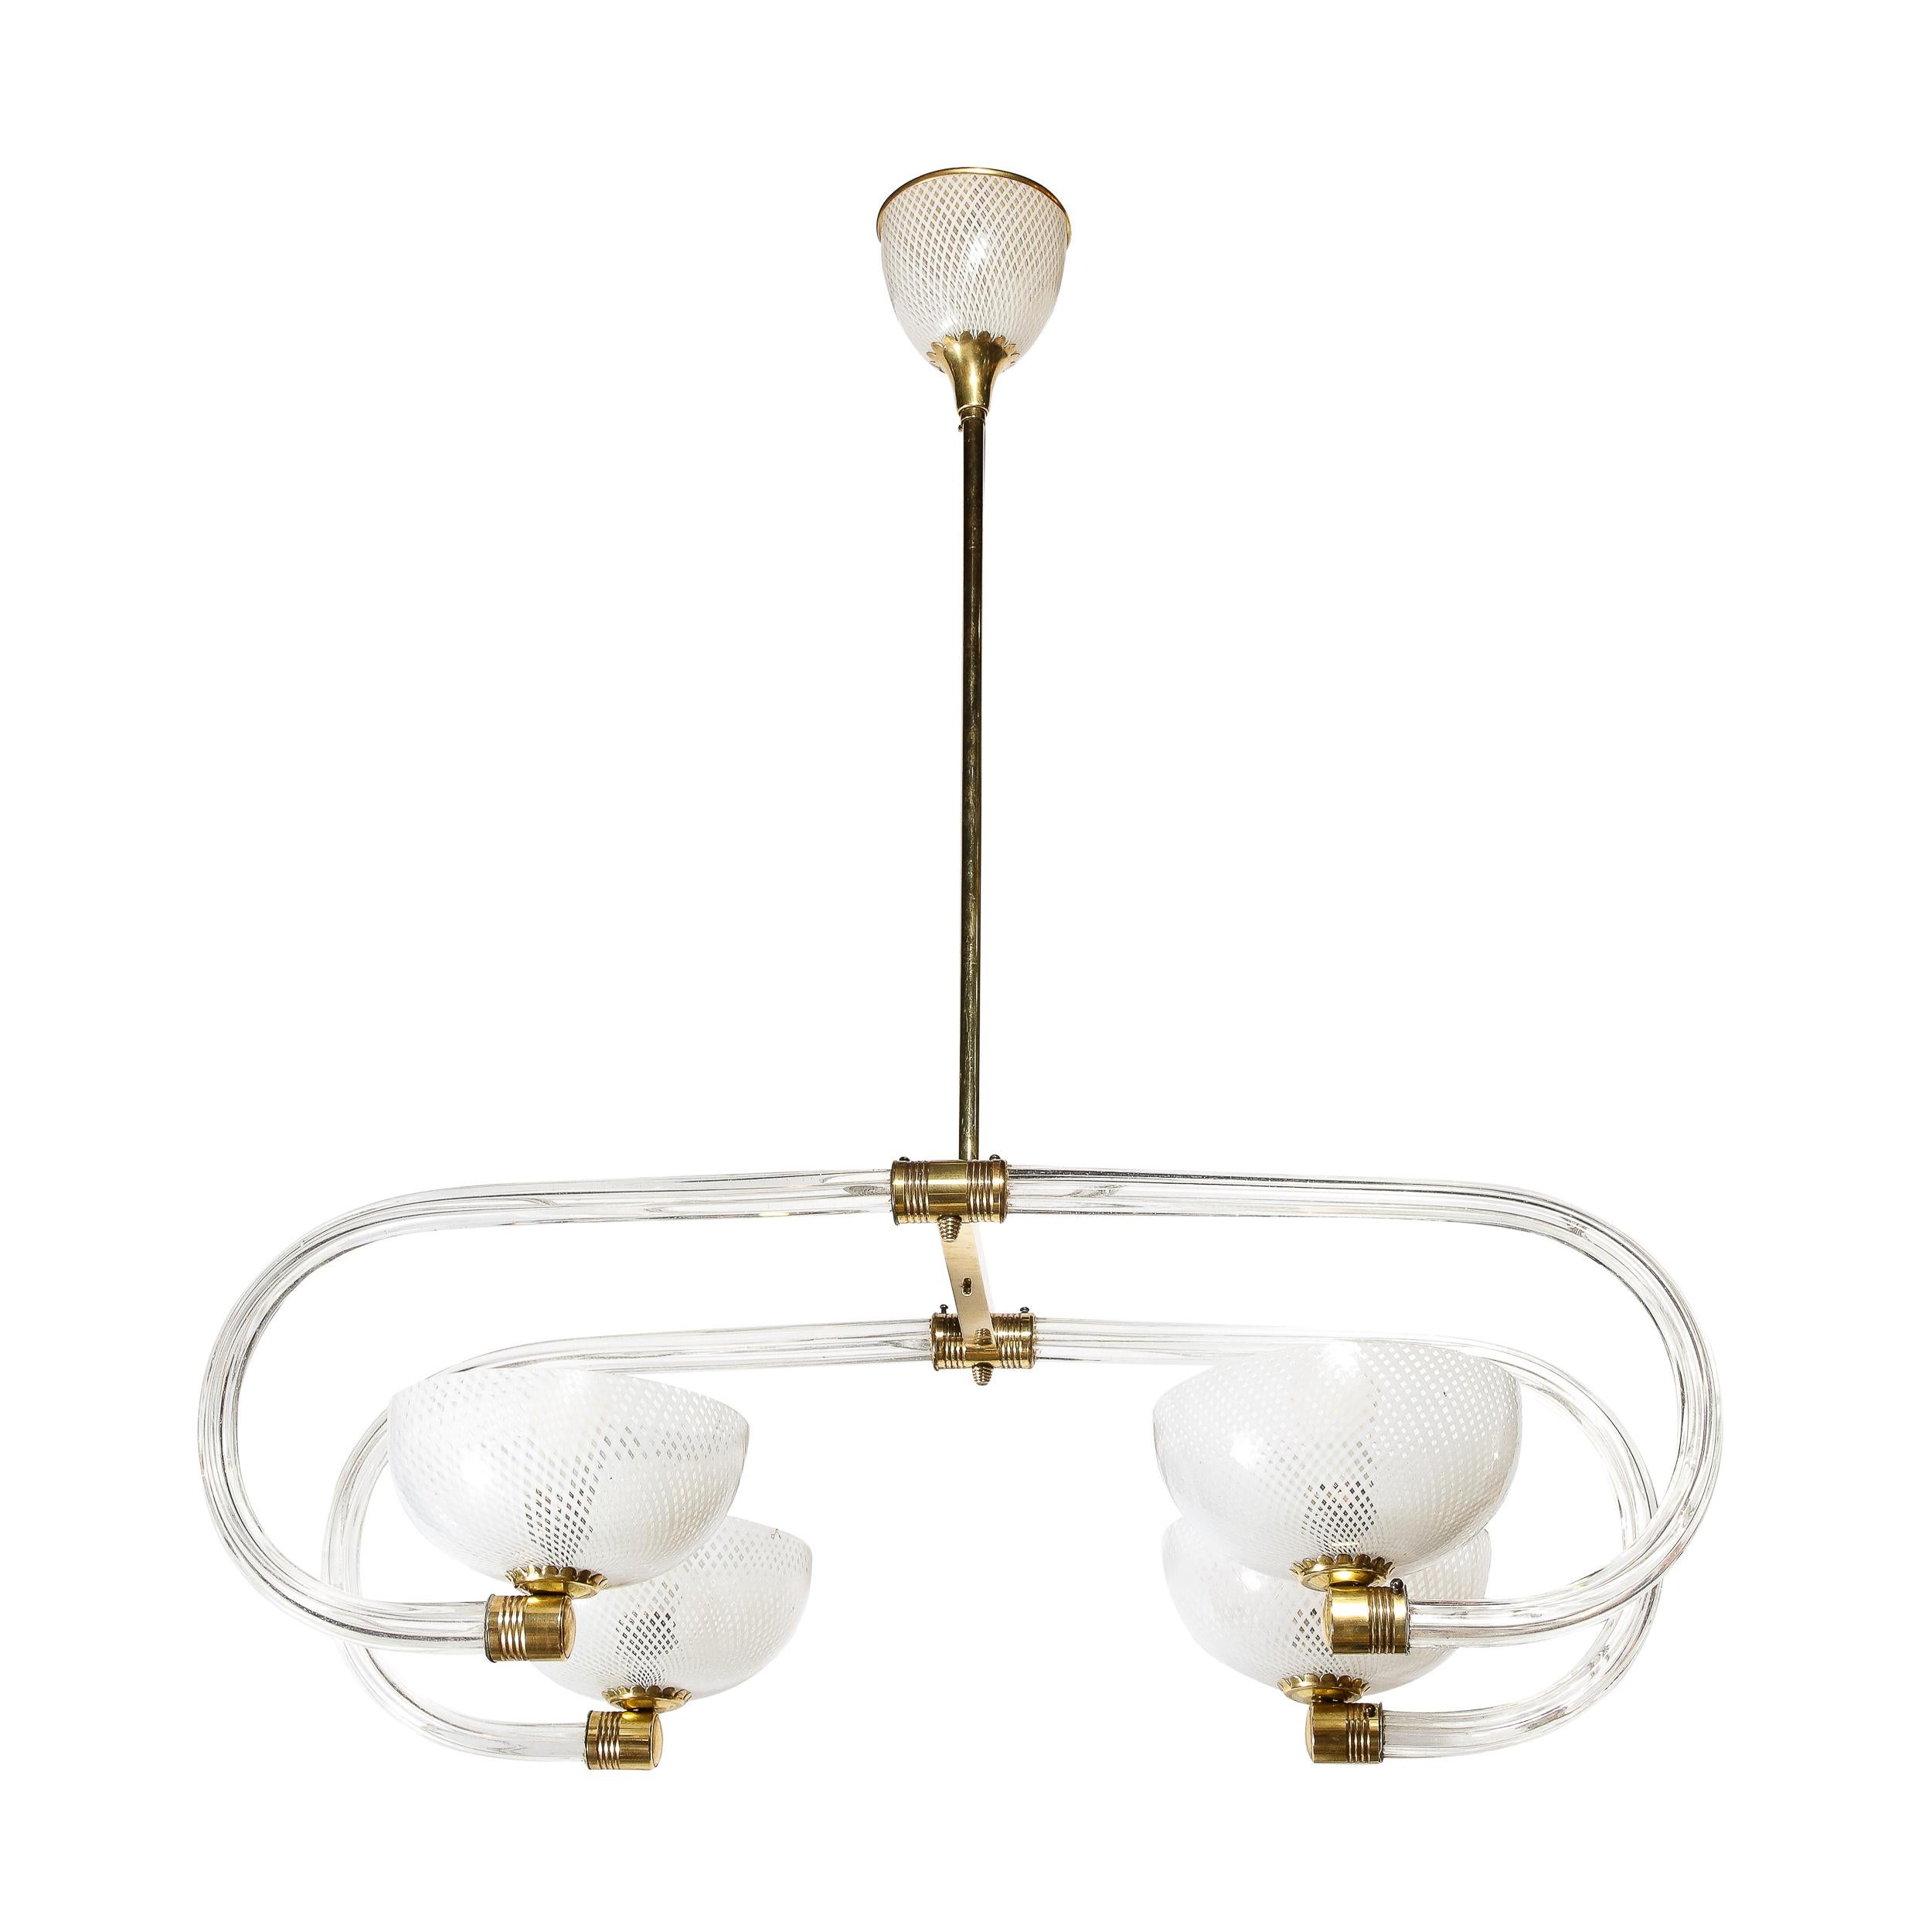 This is a stunning masterpiece of Mid-Century Modernist design, originating from one of the oldest companies on earth, the illustrious Barovier Y Tosso, made in Italy, Circa 1950. This four arm Chandelier features effortlessly sophisticated custom